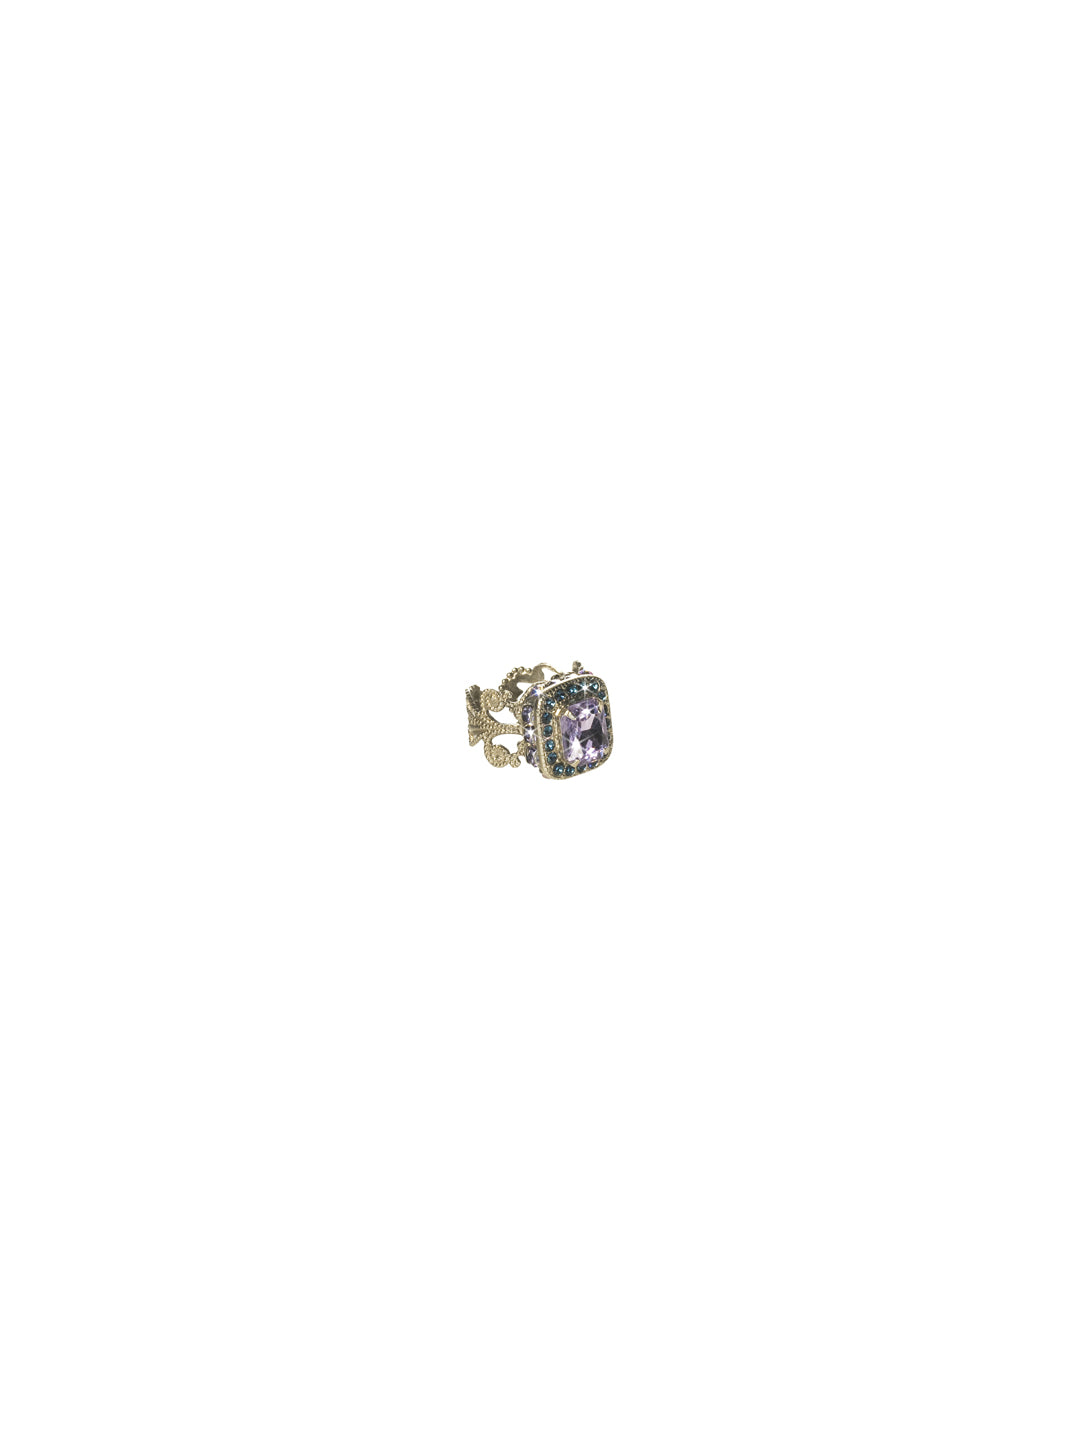 Stunning Symmetry Ring - RCL5ASHY - This classic ring features a petite emerald cut stone at its center surrounded by rows of round crystals. A delicate filgree band gives this ring an added touch of elegance. From Sorrelli's Hydrangea collection in our Antique Silver-tone finish.